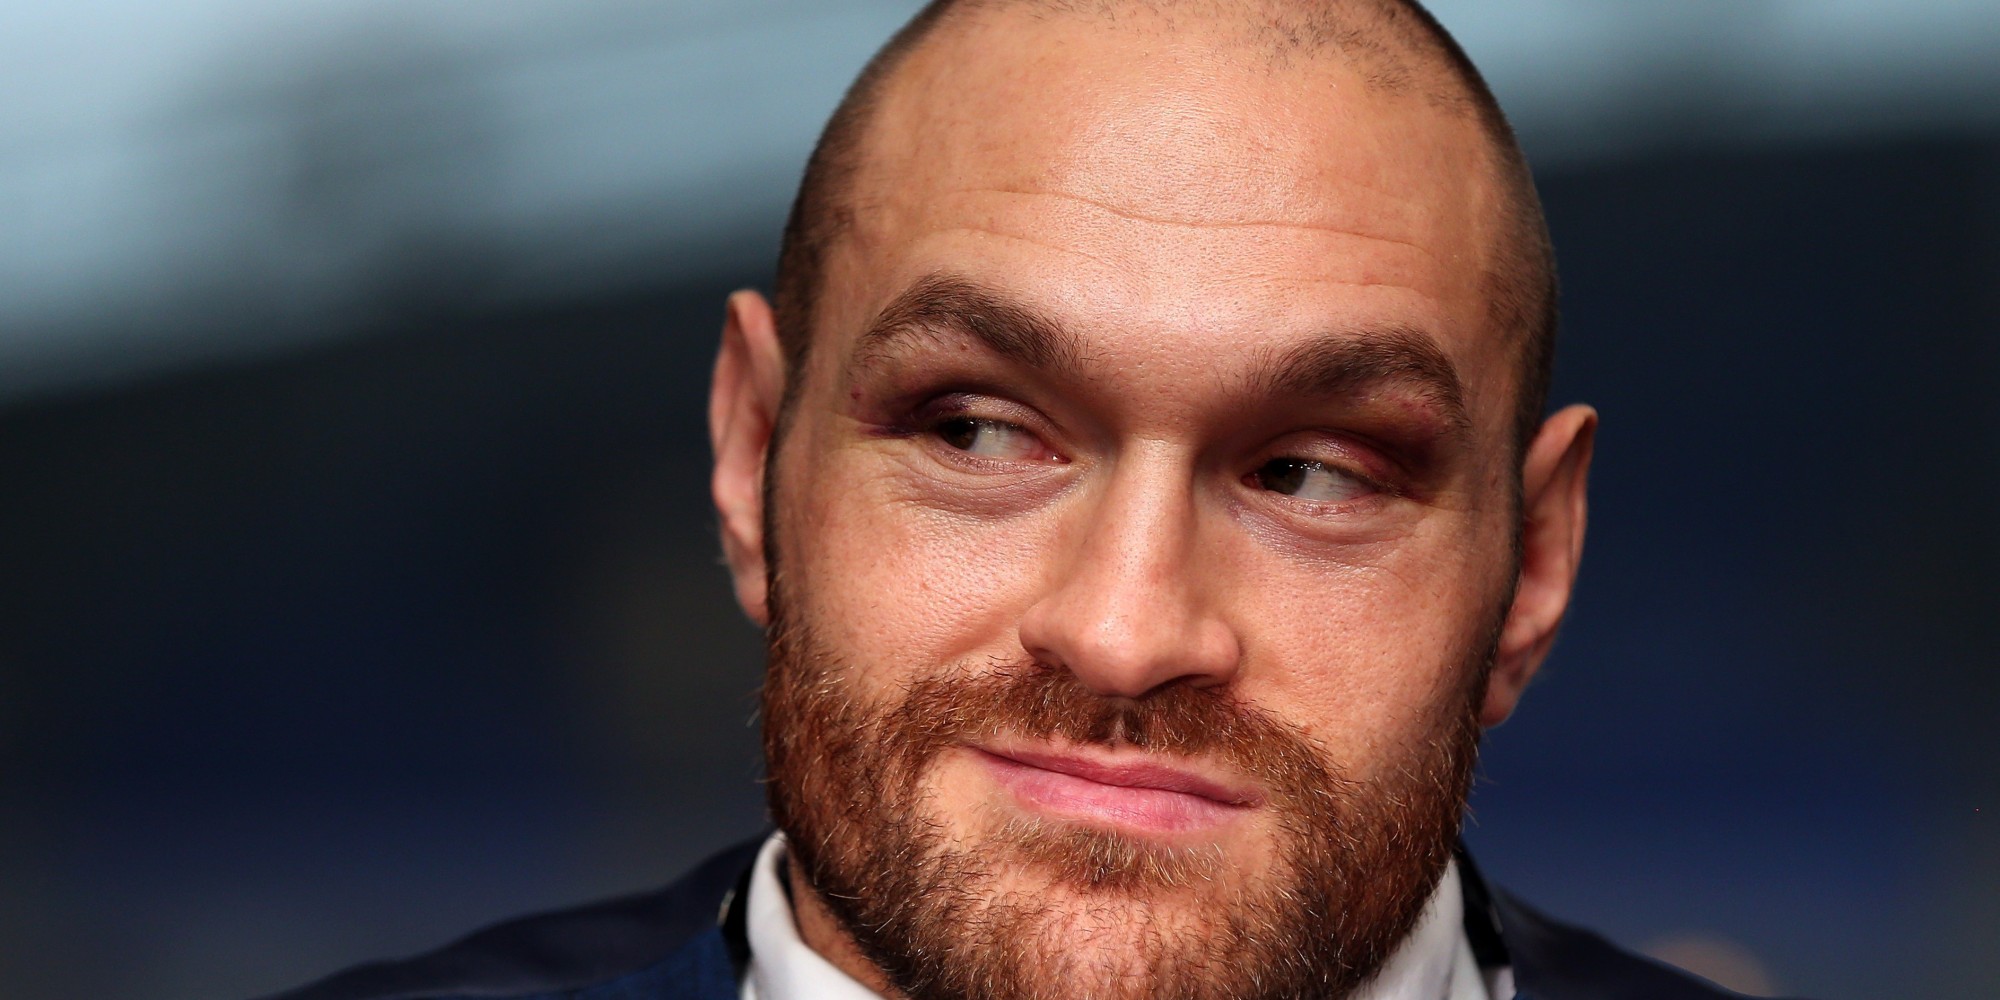 Tyson Fury Receives No Punishment For Controversial Remarks About Women